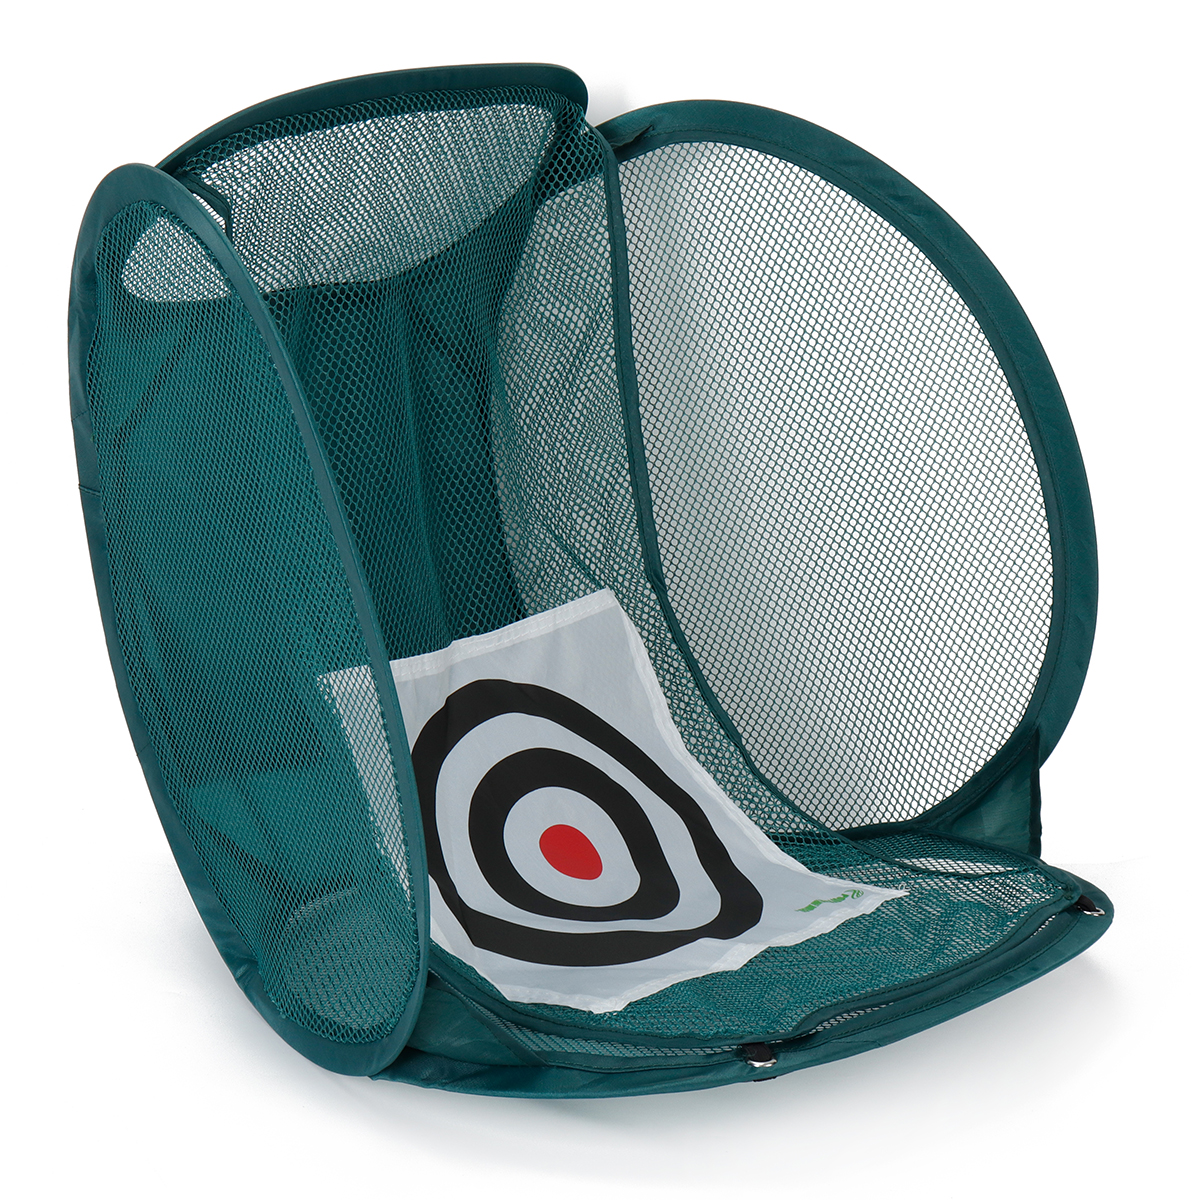 Foldable-Golf-Trainning-Net-Practice-Target-Net-With-Storage-Bag-Hitting-Cage-Indoor-Outdoor-Chippin-1656807-5